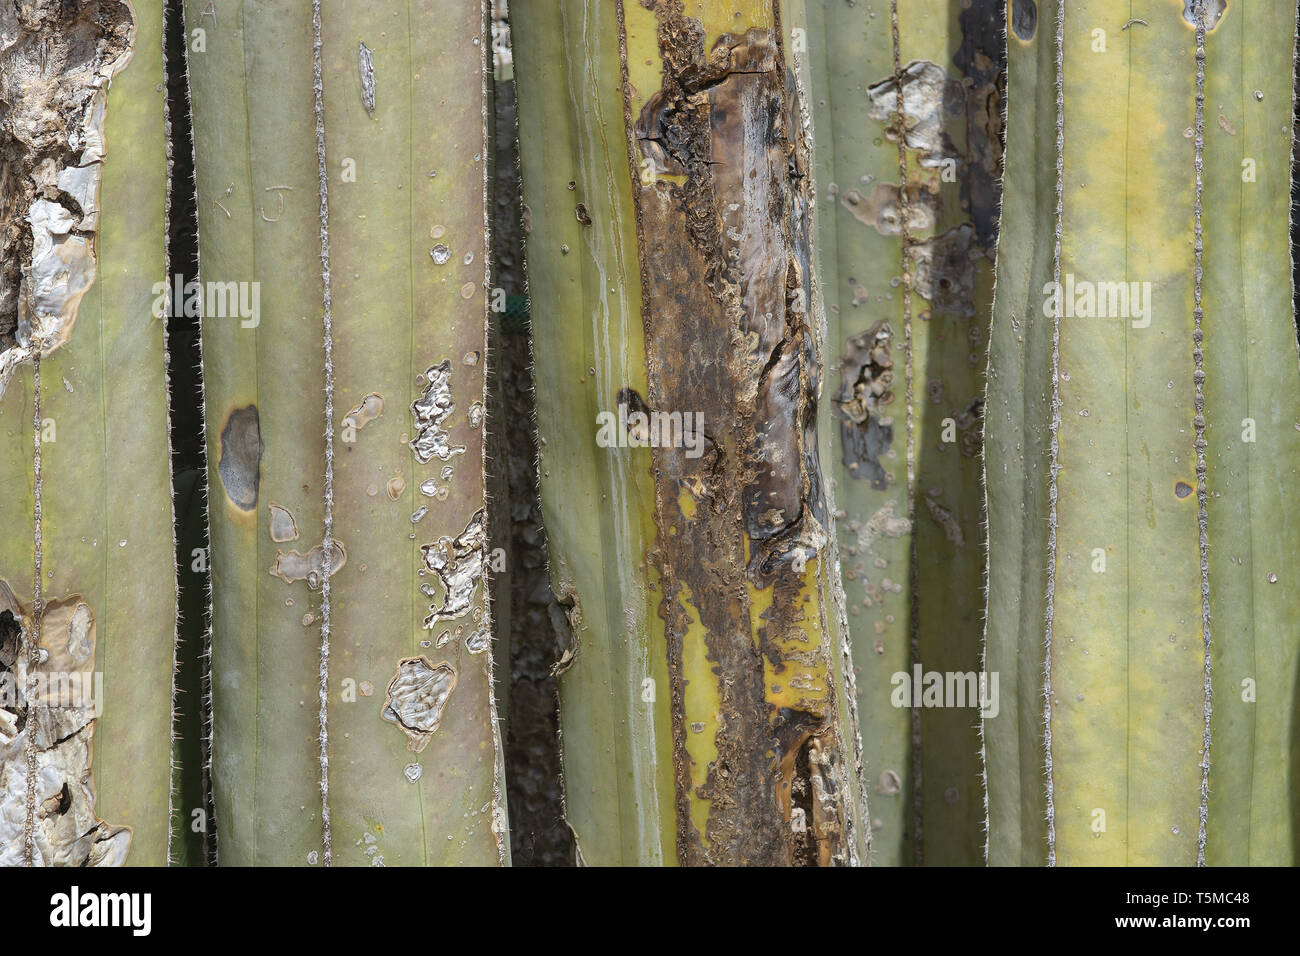 Cracked and aged cactus surface skin abstract organic background texture in brown and green colors Stock Photo